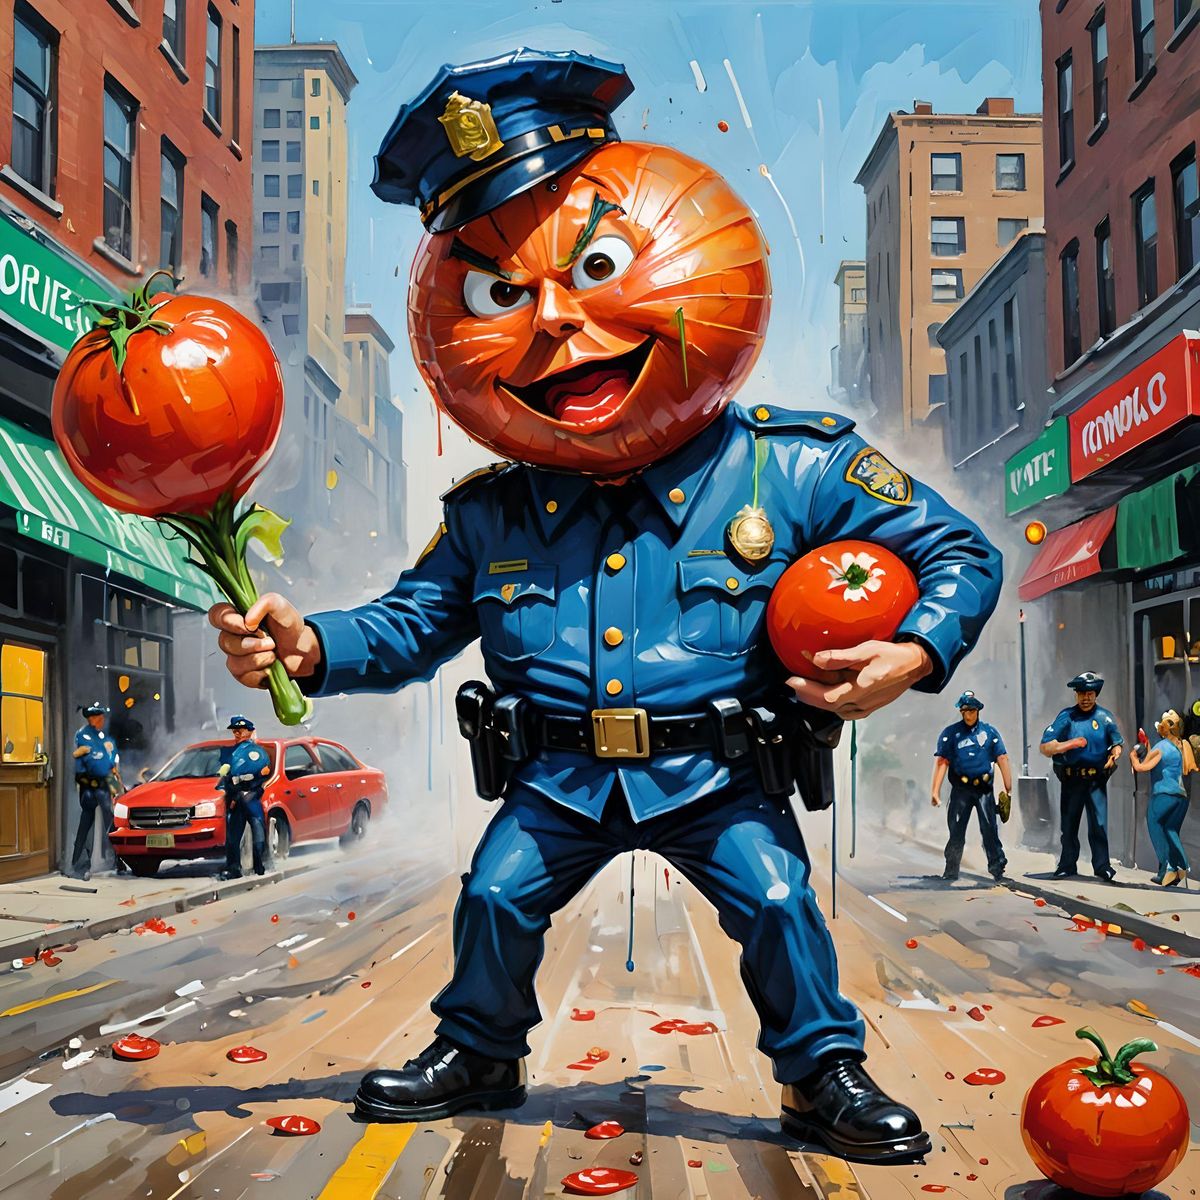 An onion cartoon character dressed up as a   New York Policeman shooting a tomato criminal cartoon character 